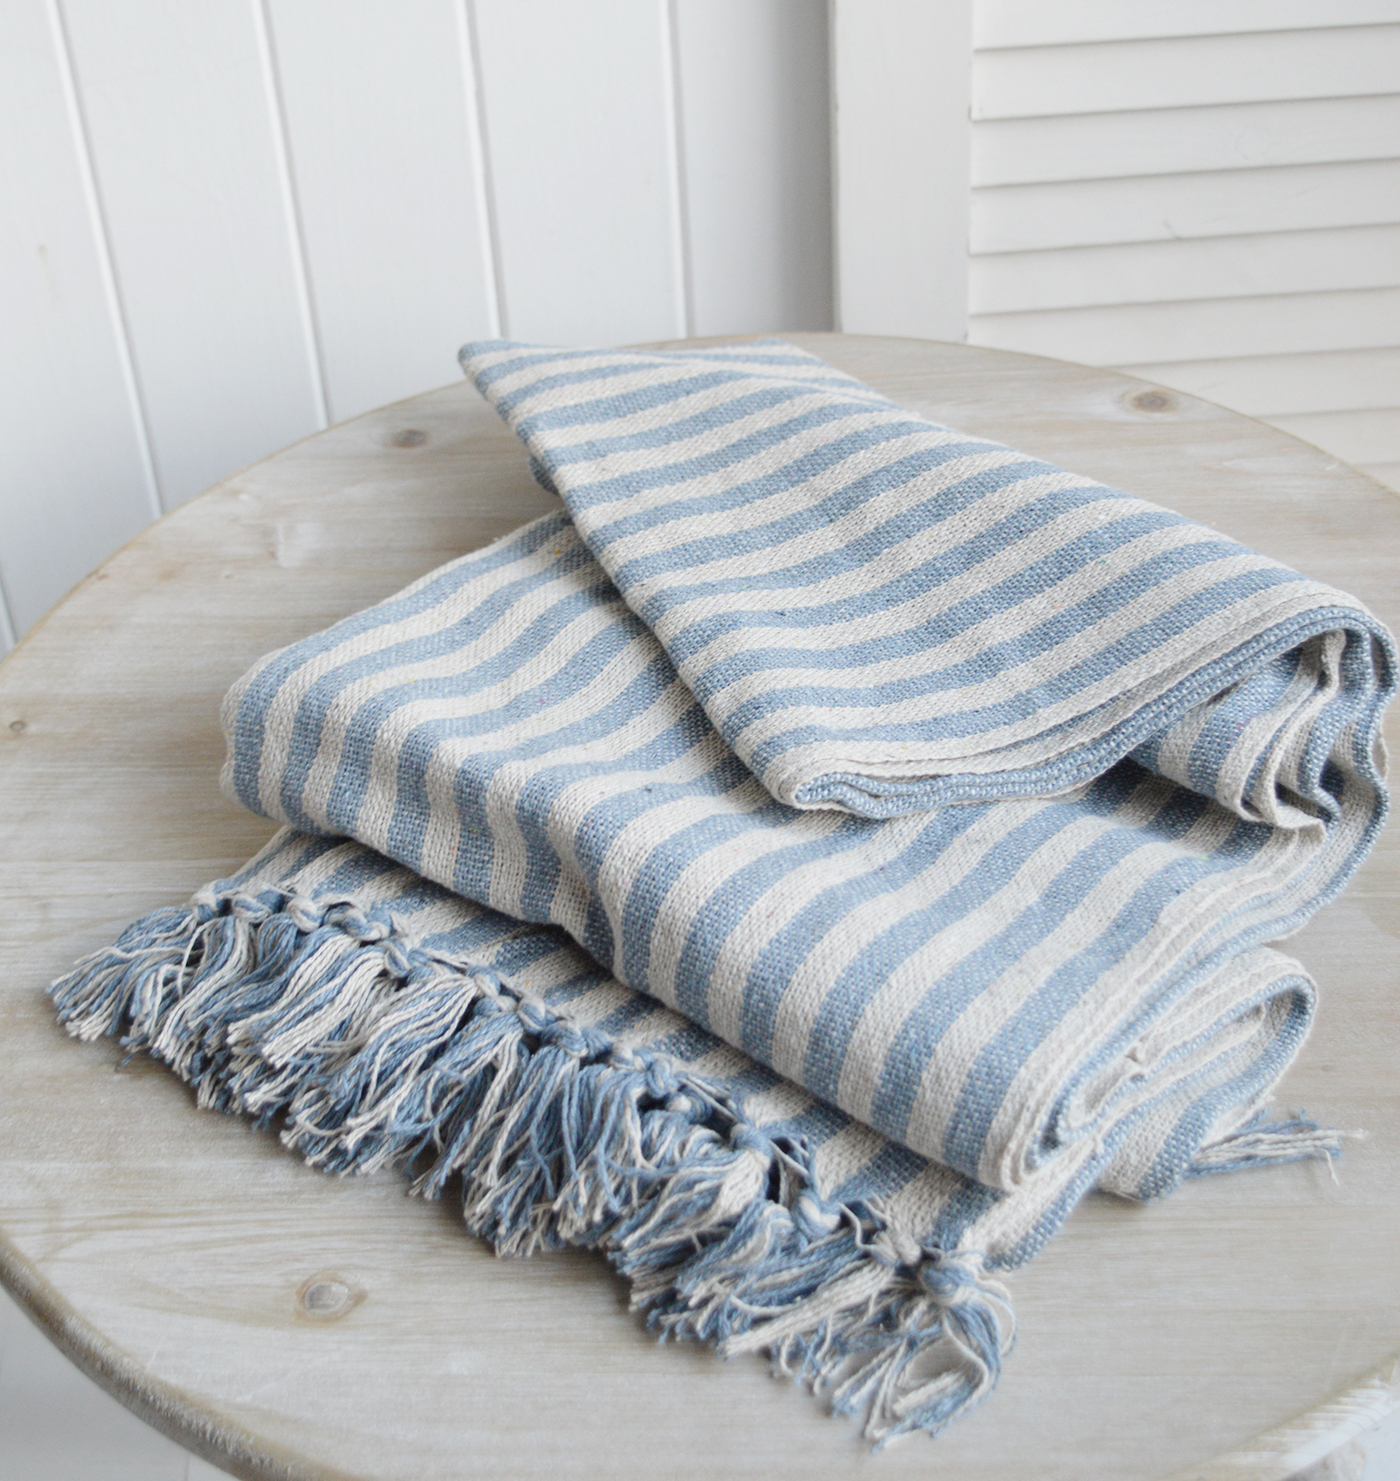 Coastal, country and modern farmhouse interiors and furniture. Navy Blue Mapleton Stripe throws for cosy homes and interiors